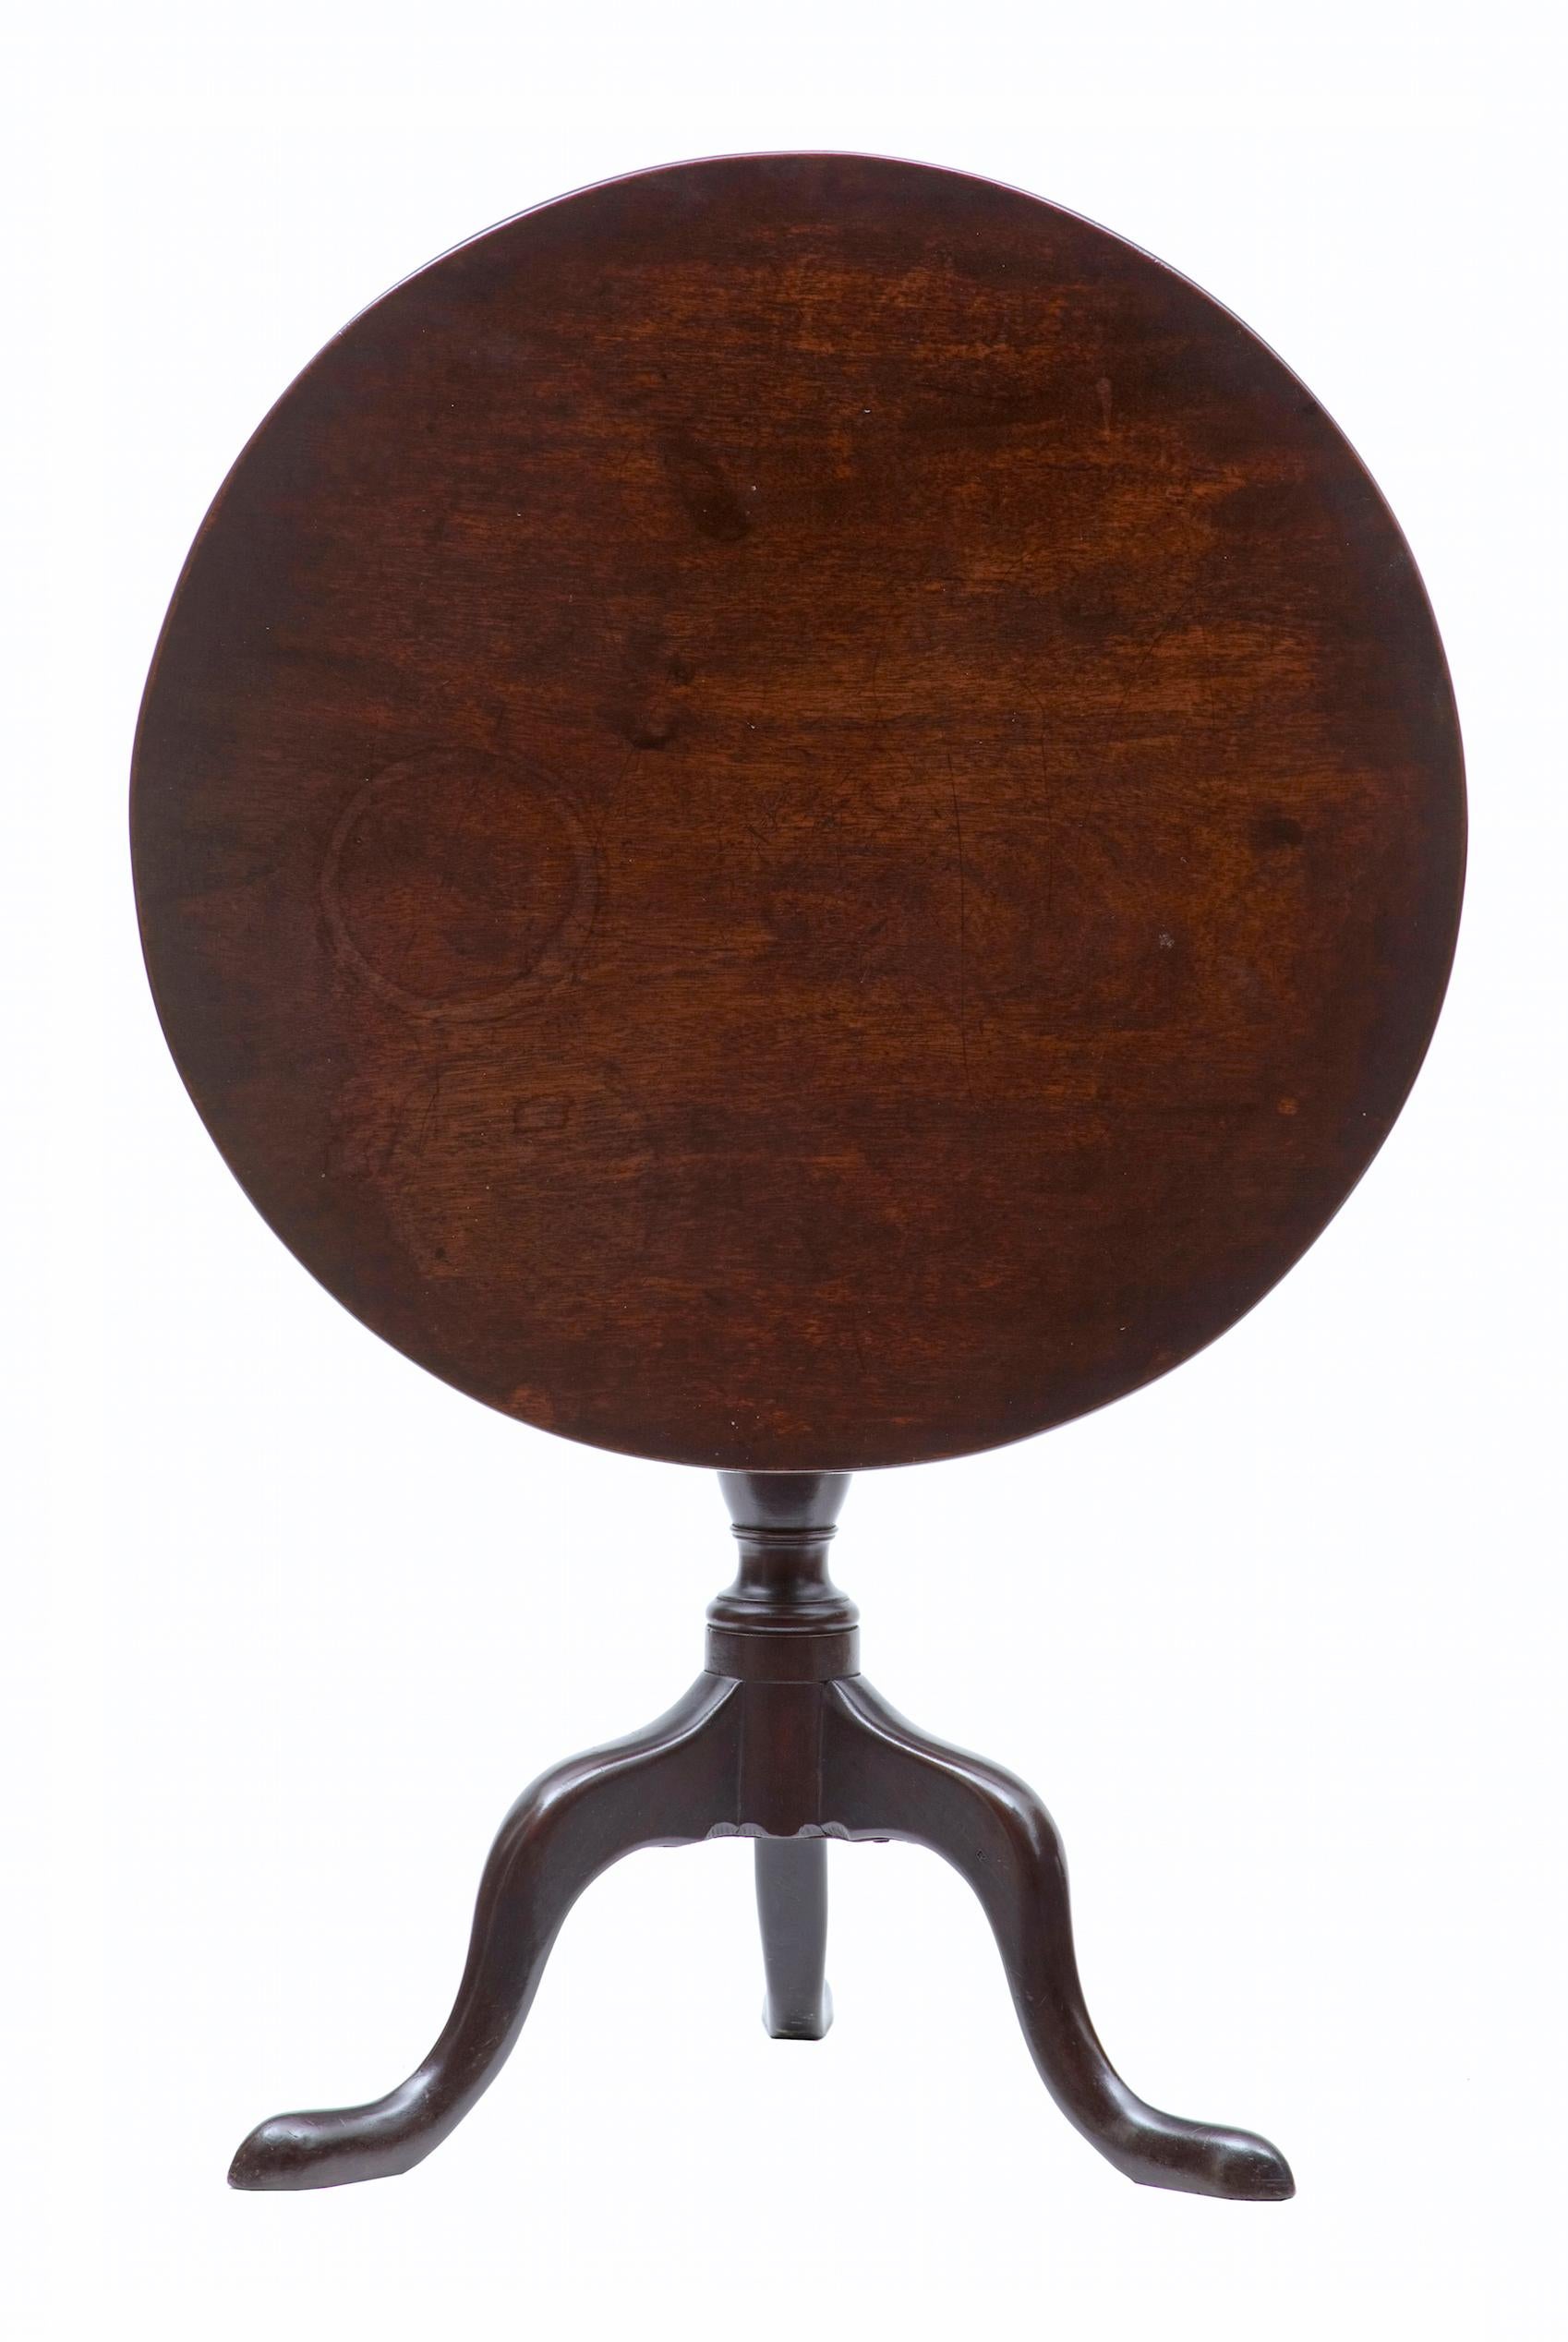 Superb mahogany George III wine table, circa 1770. In original condition, with excellent color and patina (the top can be re-polished upon request be we recommend it retains its original patina built up over the years.) standing on turned stem and